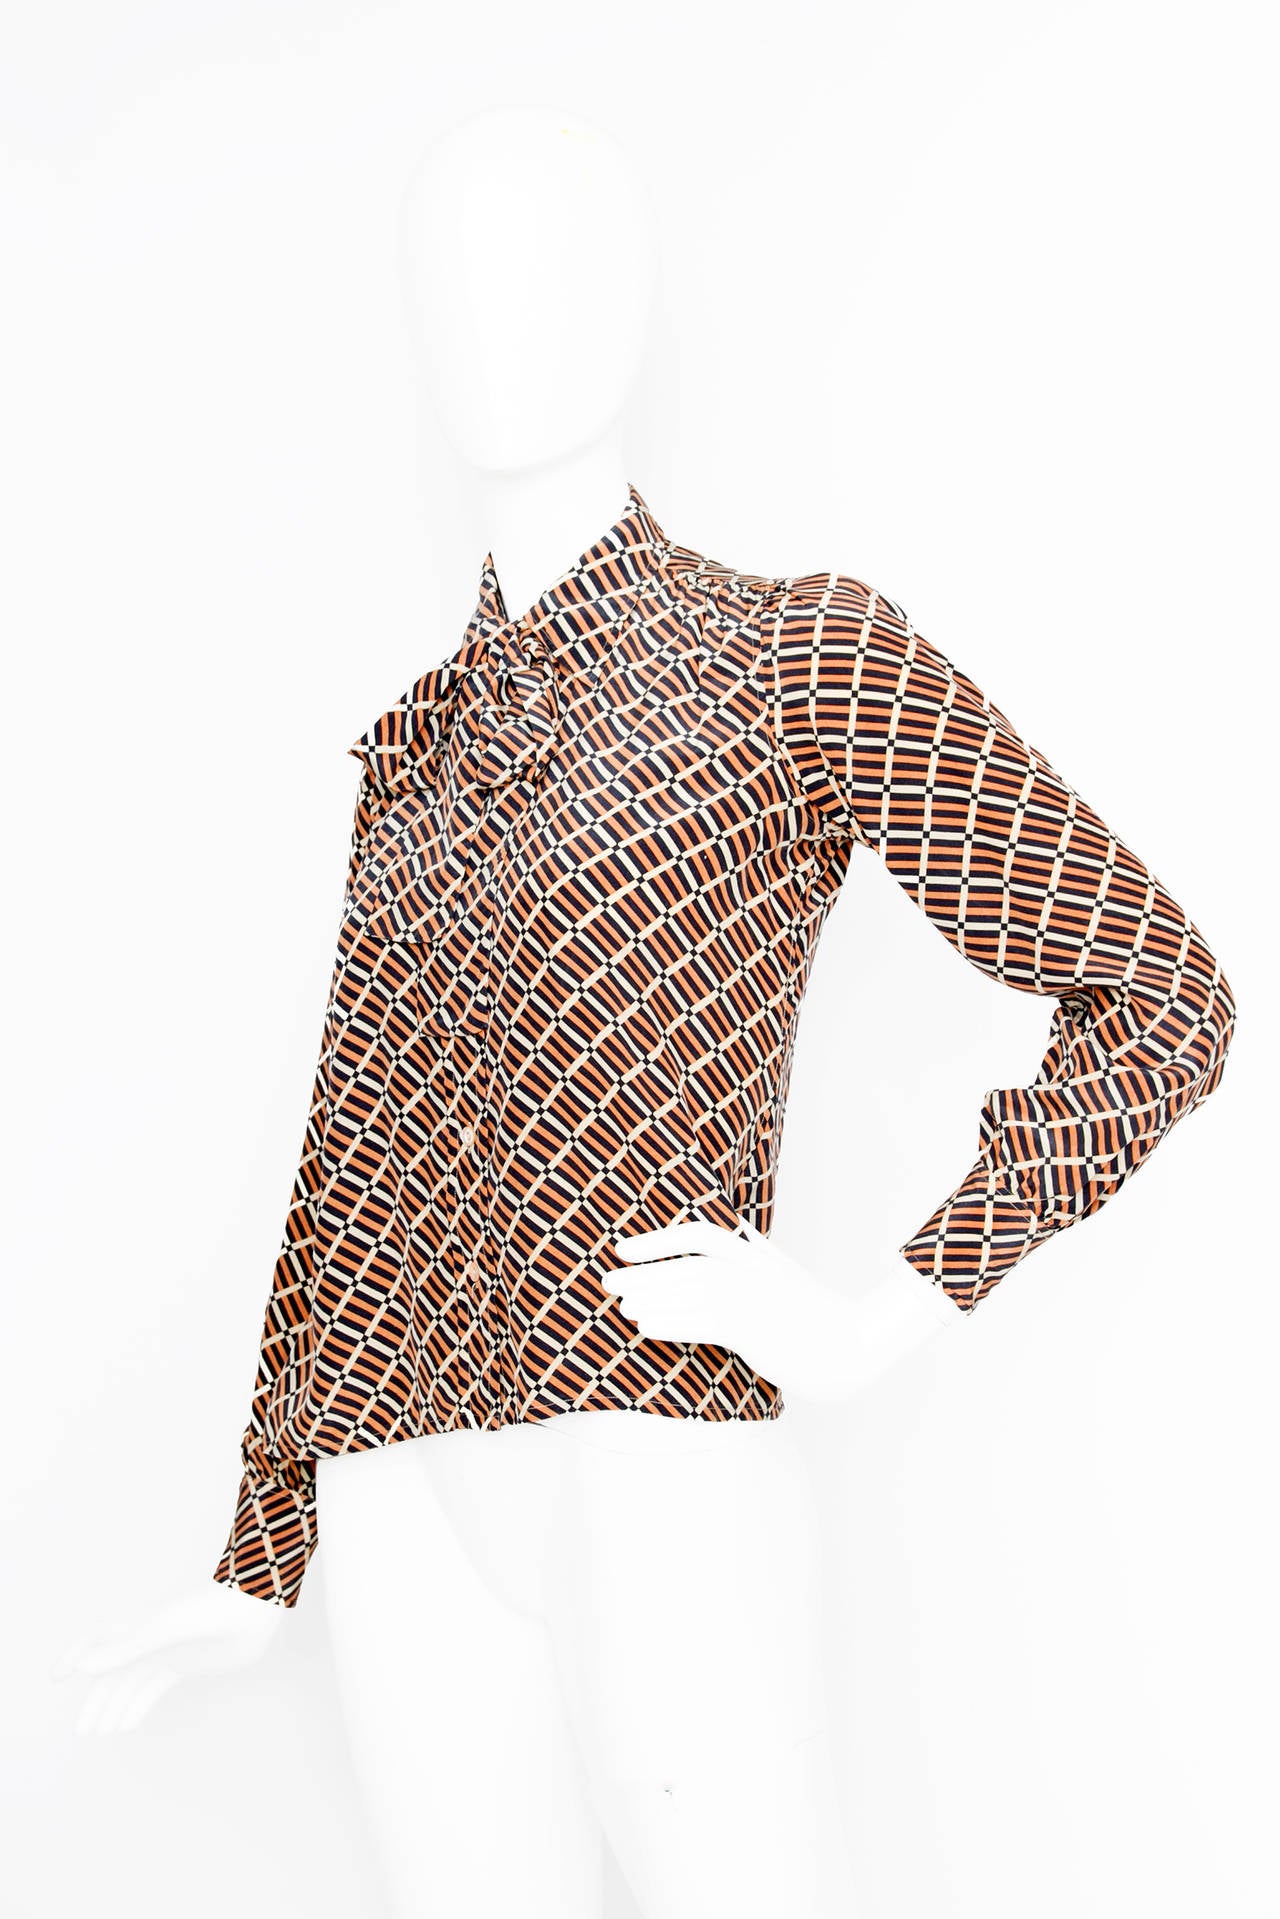 A 1970s Yves Saint Laurent silk shirt with an all over graphic print in brown, black and white. The shirt has long sleeves with two buttoned cuffs and a tie ribbon detail attached under the collar. The shirt closes down the front with pale orange